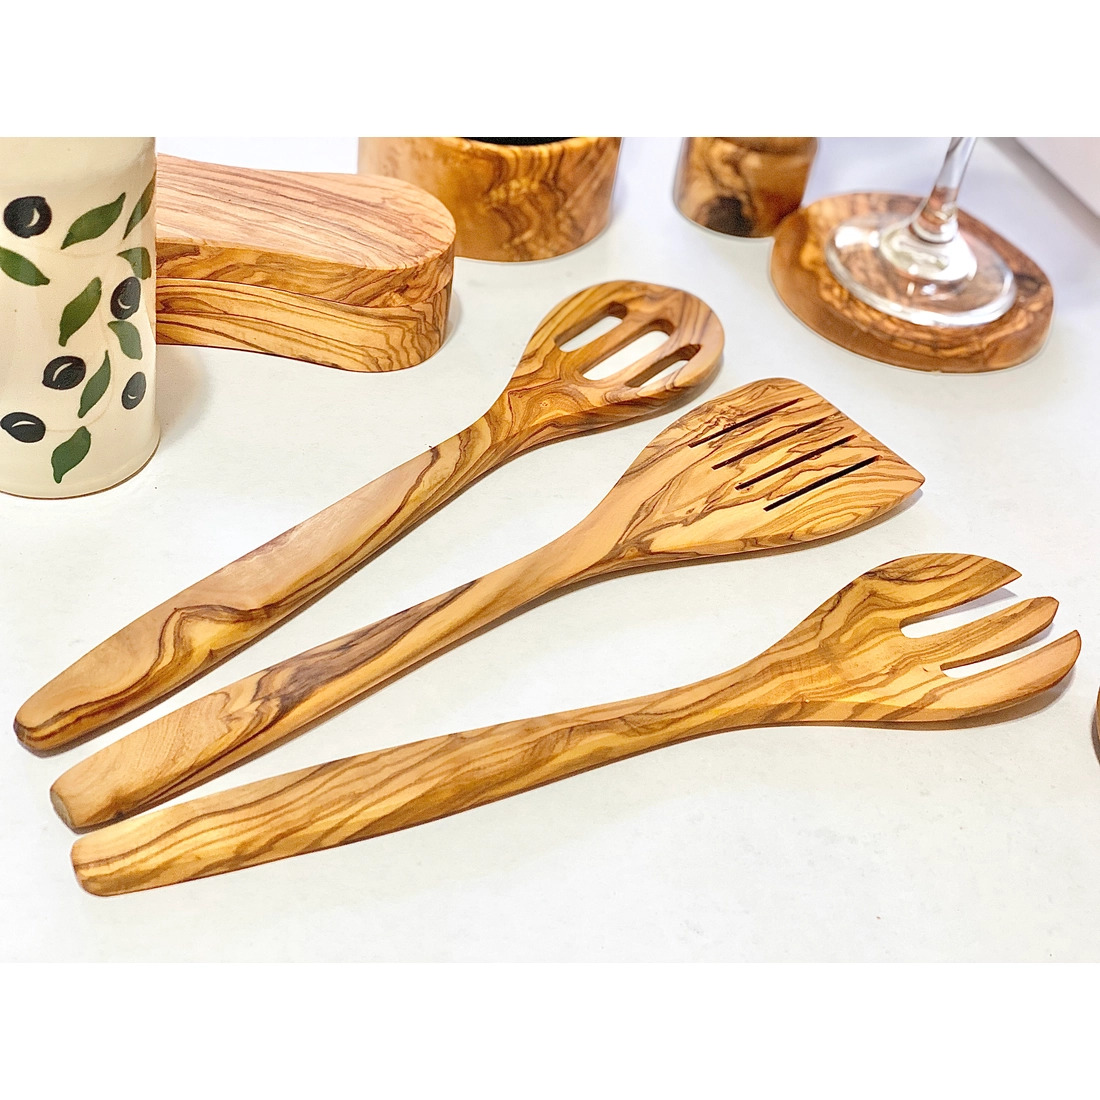 https://thepinehurstoliveoilco.com/wp-content/uploads/2022/10/Fork_-Slotted-spatula_-Slotted-spoon-2.jpg